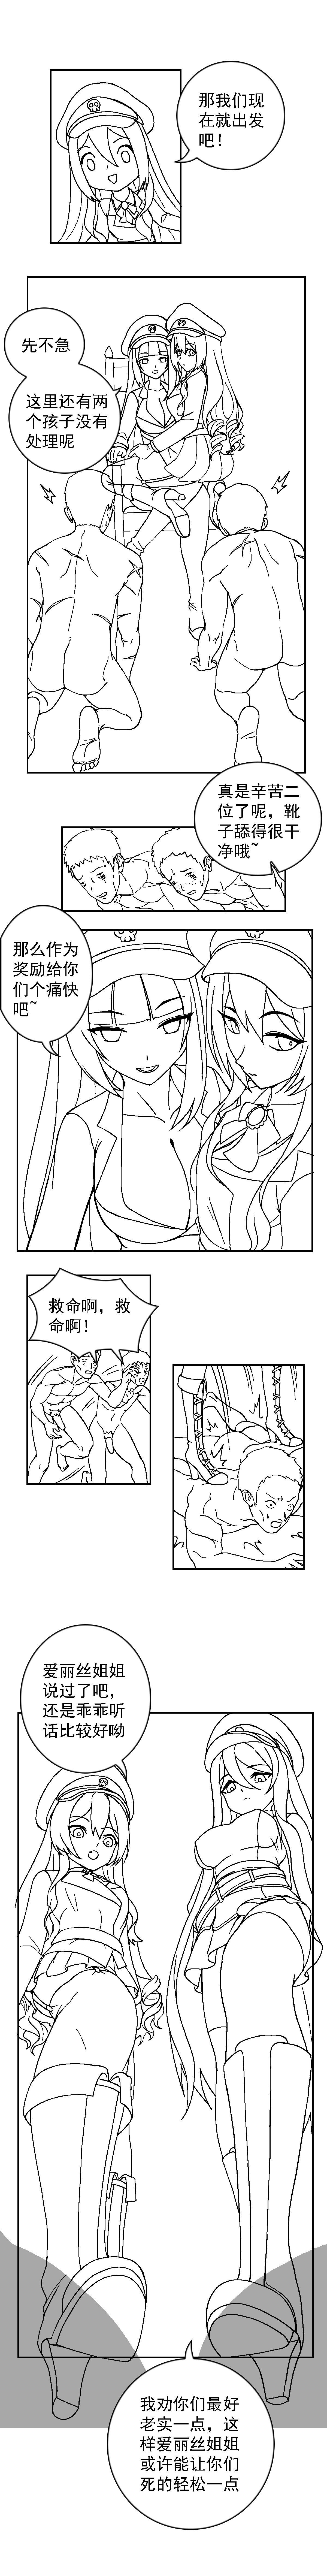 Mofos [Weixiefashi] The Cruel Empire Executioners black-and-white [帝国处刑官爱丽丝2：残酷的处刑天使][黑白] Kink - Page 5